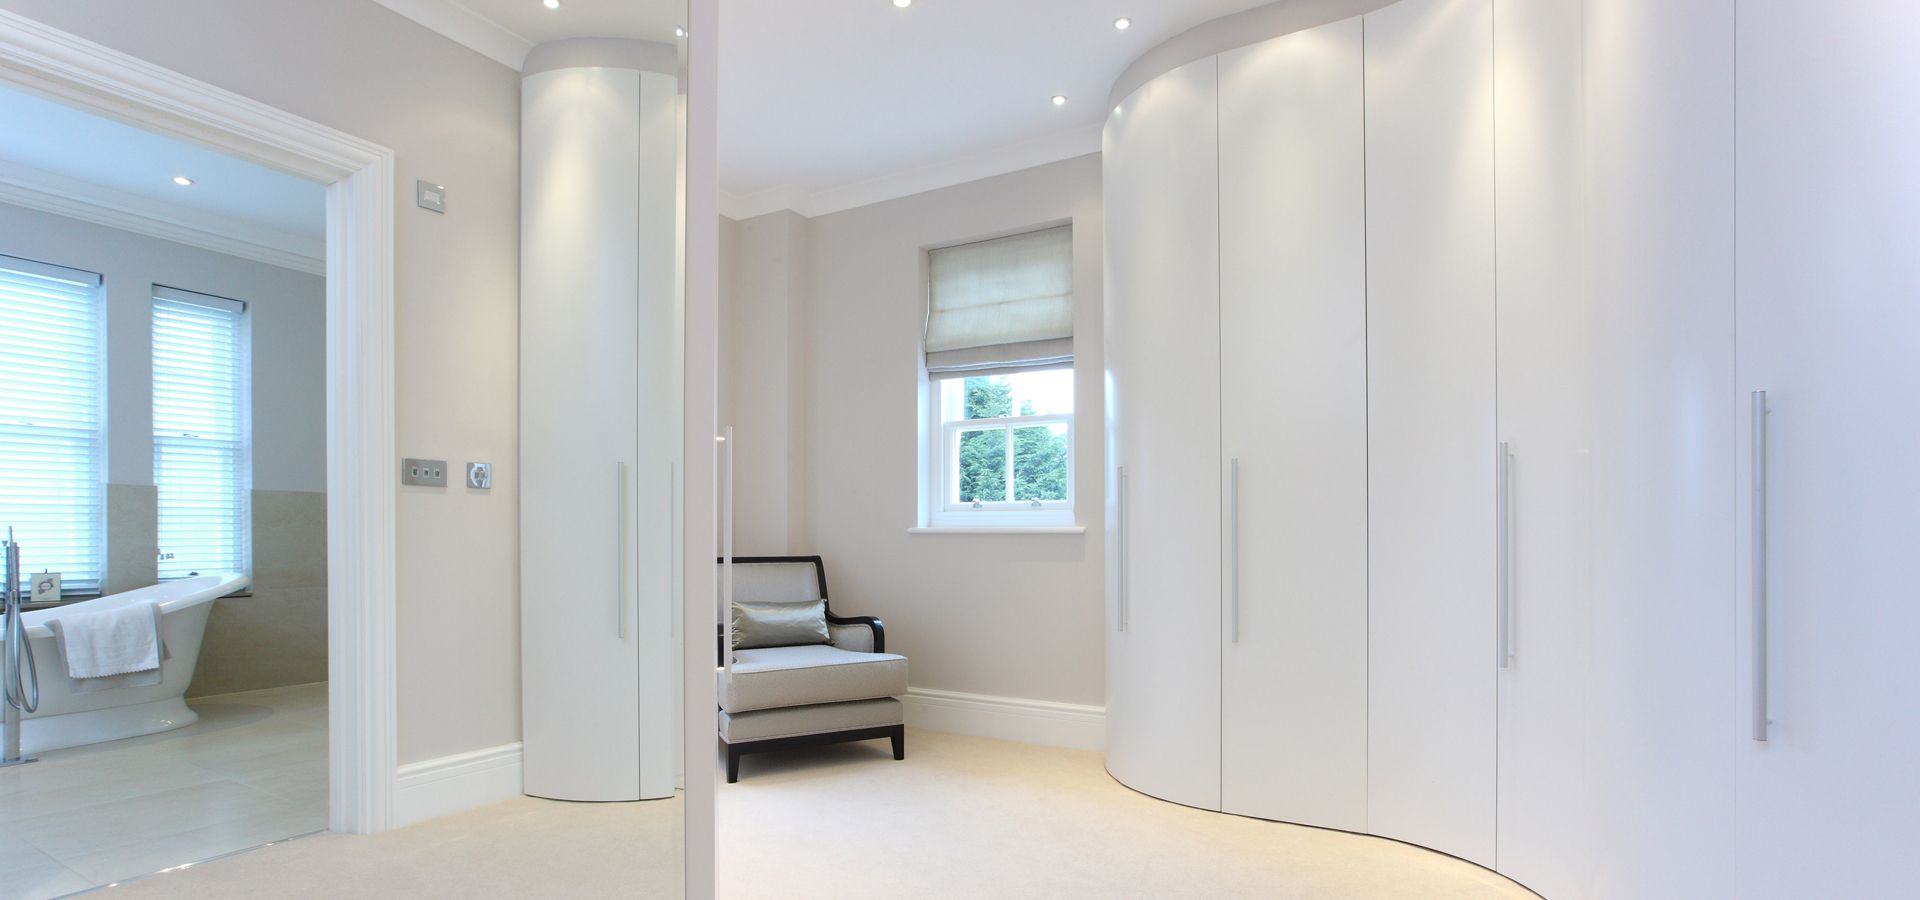 Alfa Curve – Fitted Bedroom Furniture | Wardrobes Uk | Lawrence Walsh  Furniture Regarding Curved Wardrobes Doors (View 10 of 15)